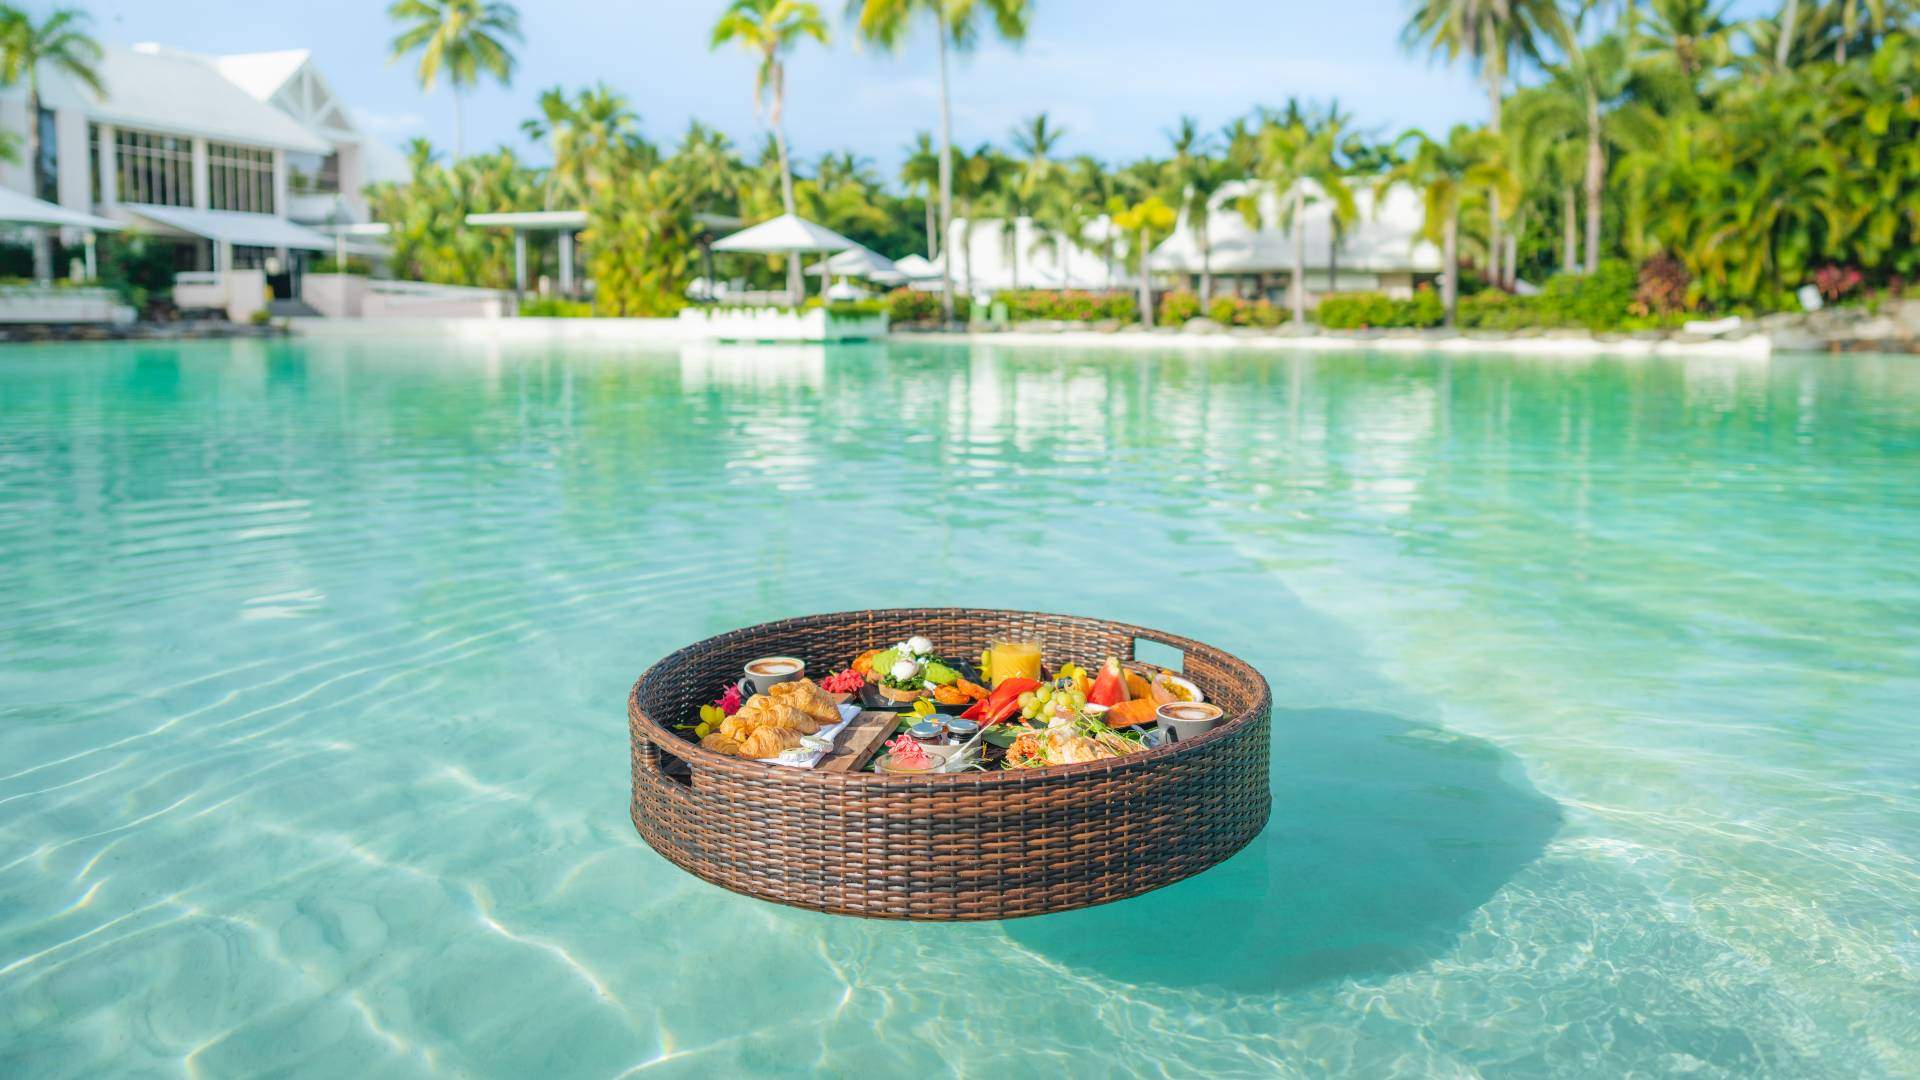 This Five-Star Resort in Port Douglas Has Just Launched a Bali-Style Floating Breakfast